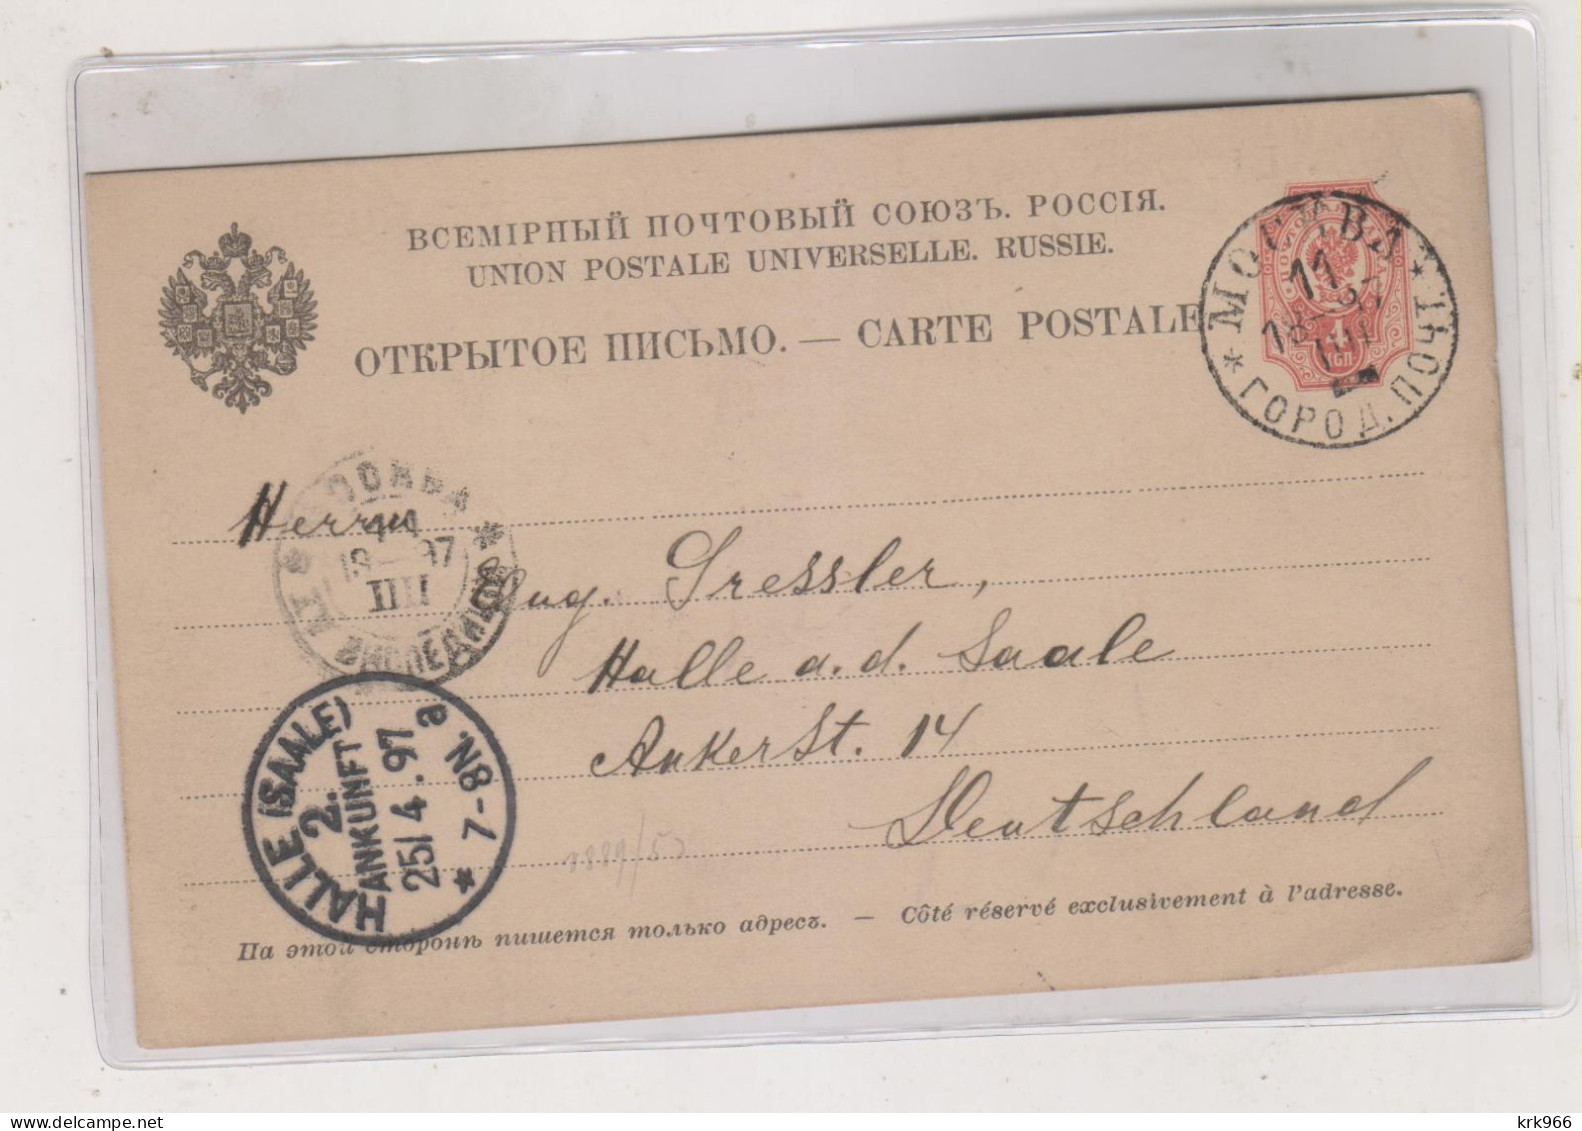 RUSSIA 1897 MOSKVA  Postal Stationery To Germany - Ganzsachen